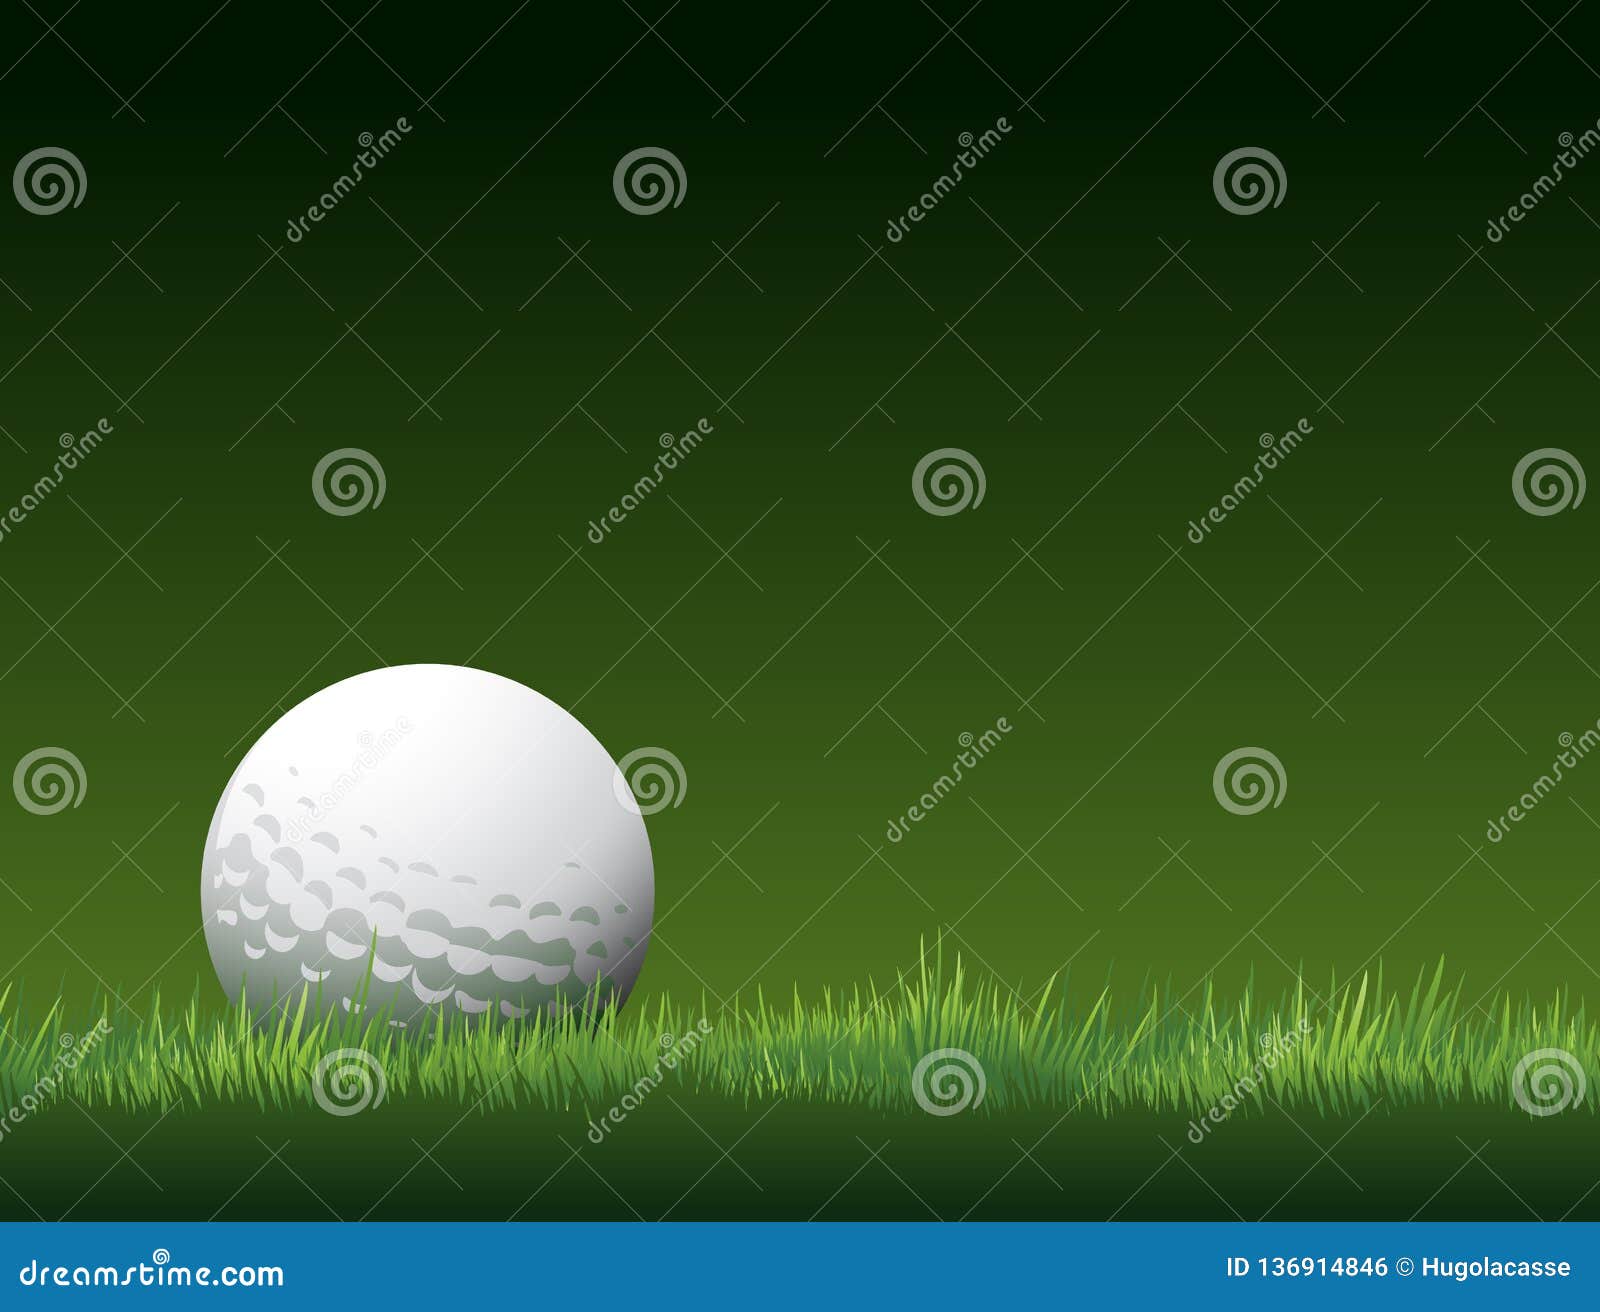 Golf Tournament Vector Background Place for Text Stock Vector ...